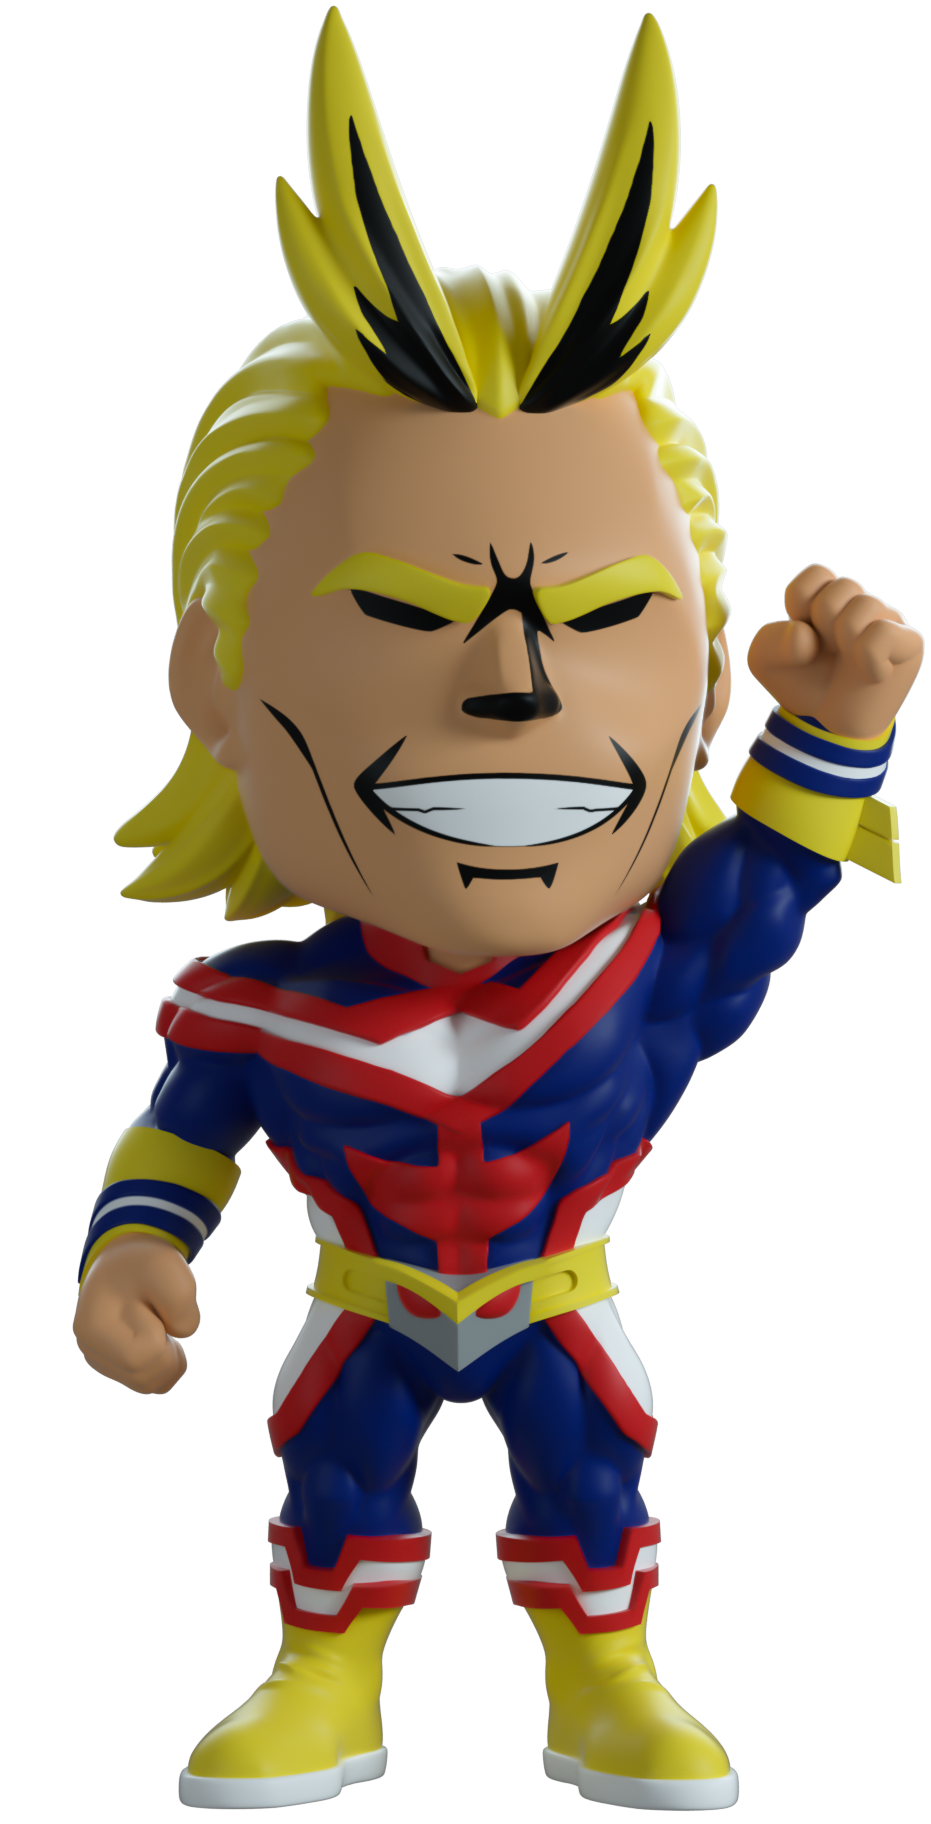 Youtooz : My Hero Academia Collection - All Might #4